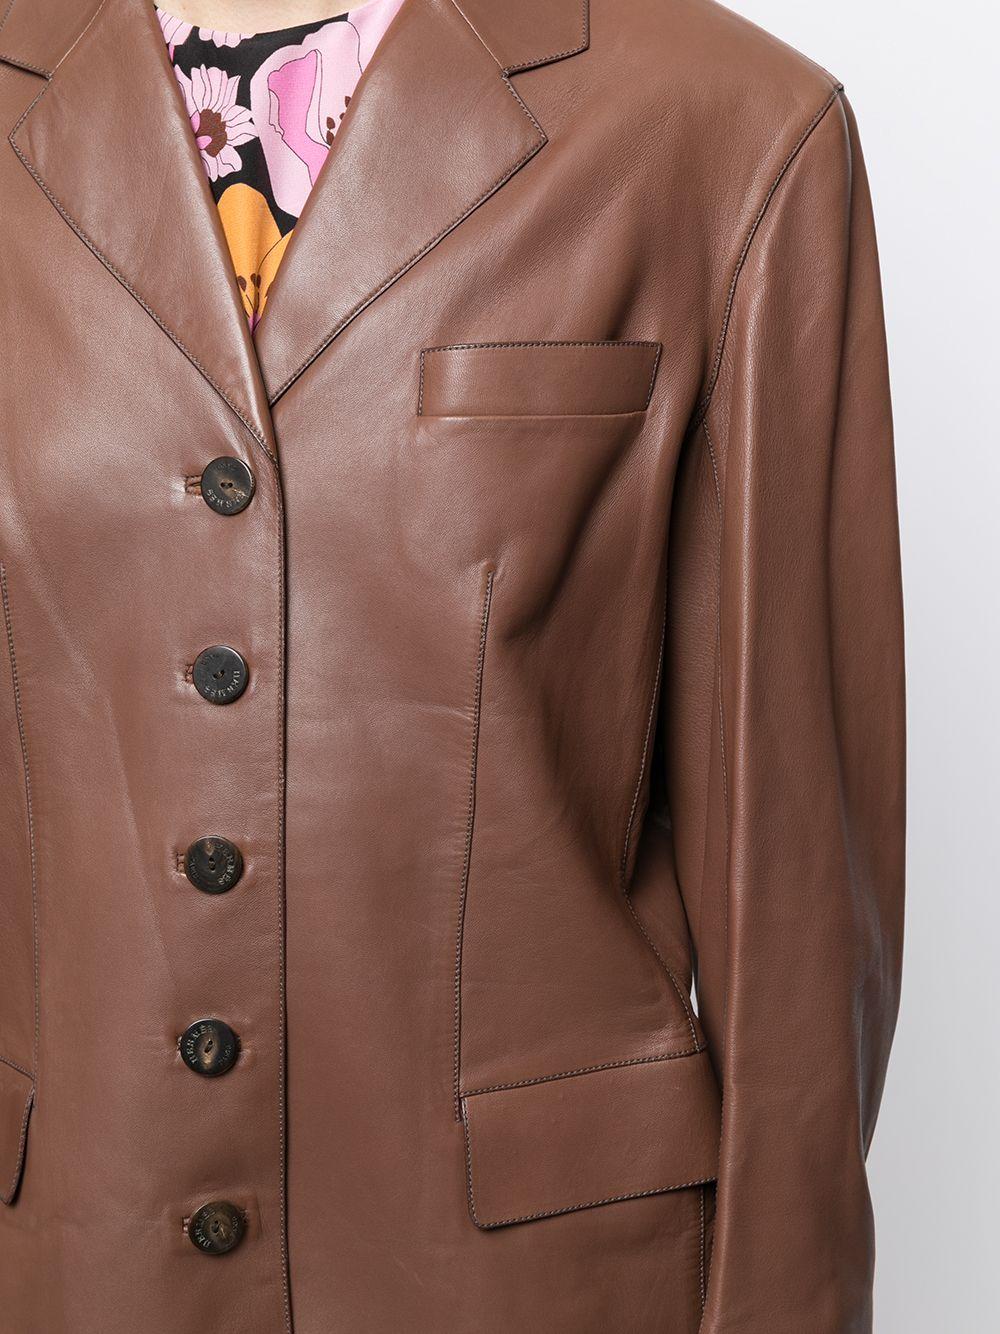 Expertly cut and crafted from smooth brown lambskin and a delightful silk lining, this vintage, long sleeved blazer features a classic cut and a four button closure. The strong silhouette of this blazer makes it a perfect statement piece any time of